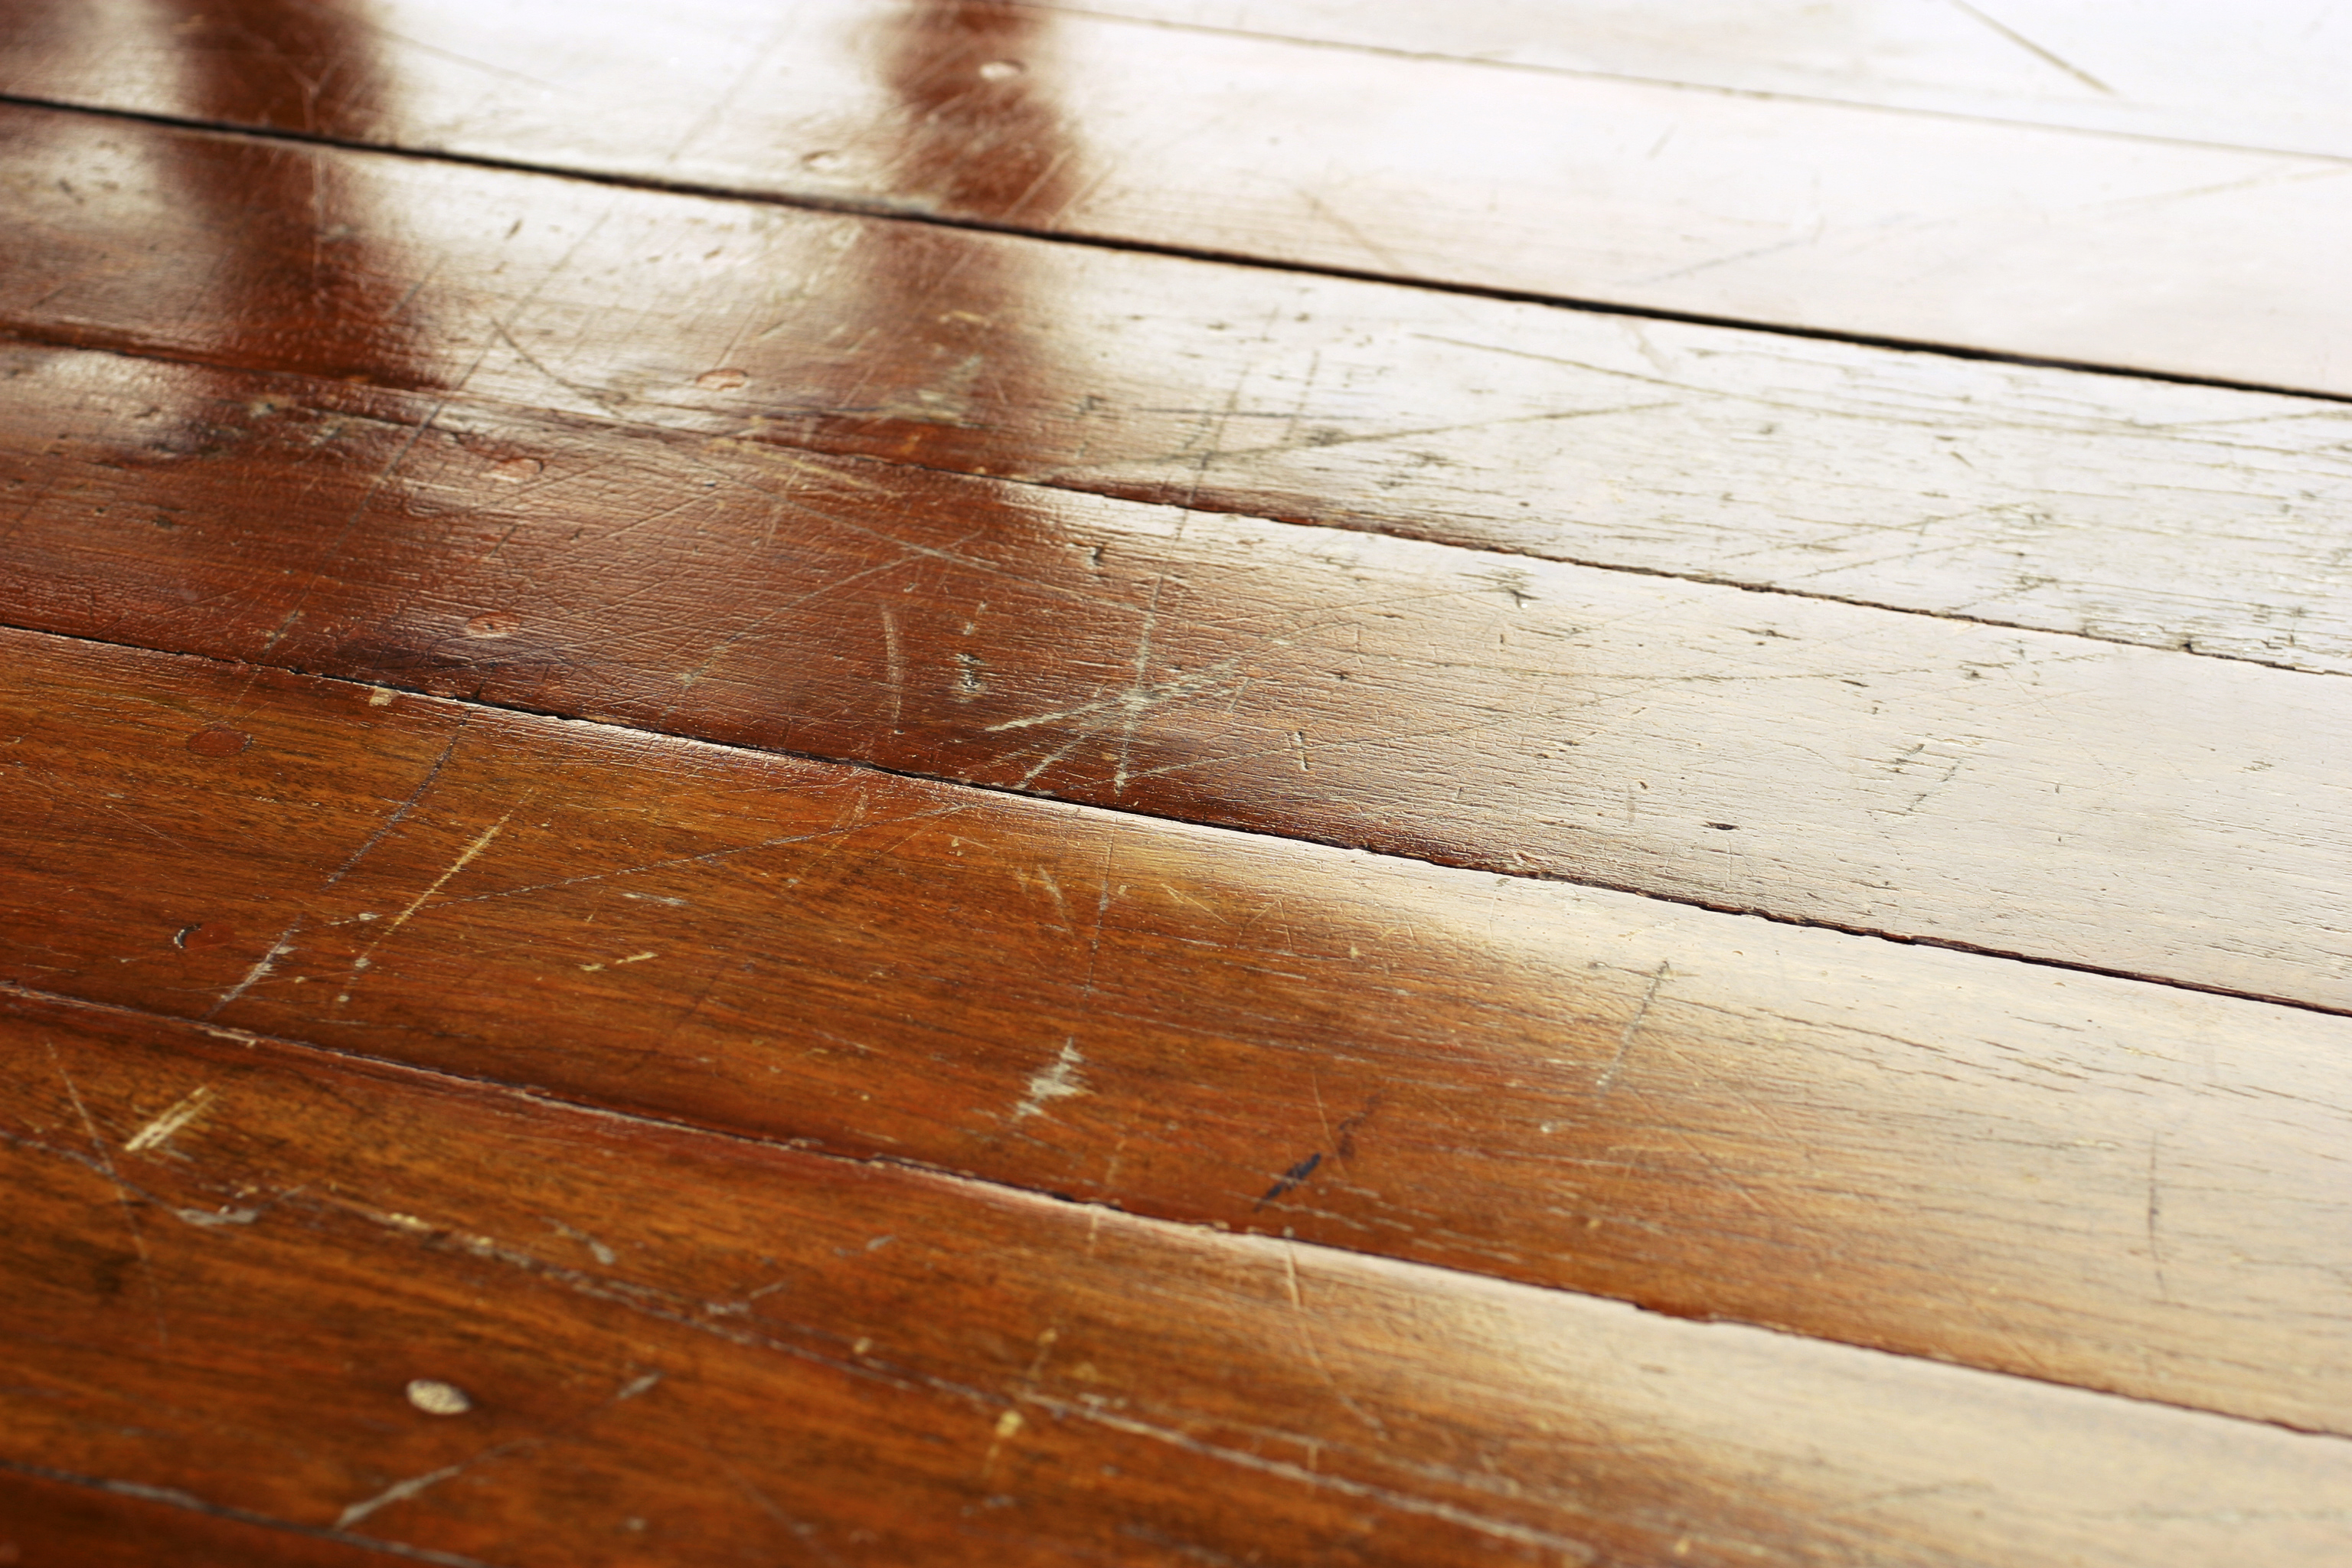 A hardwood floor is full of scratches